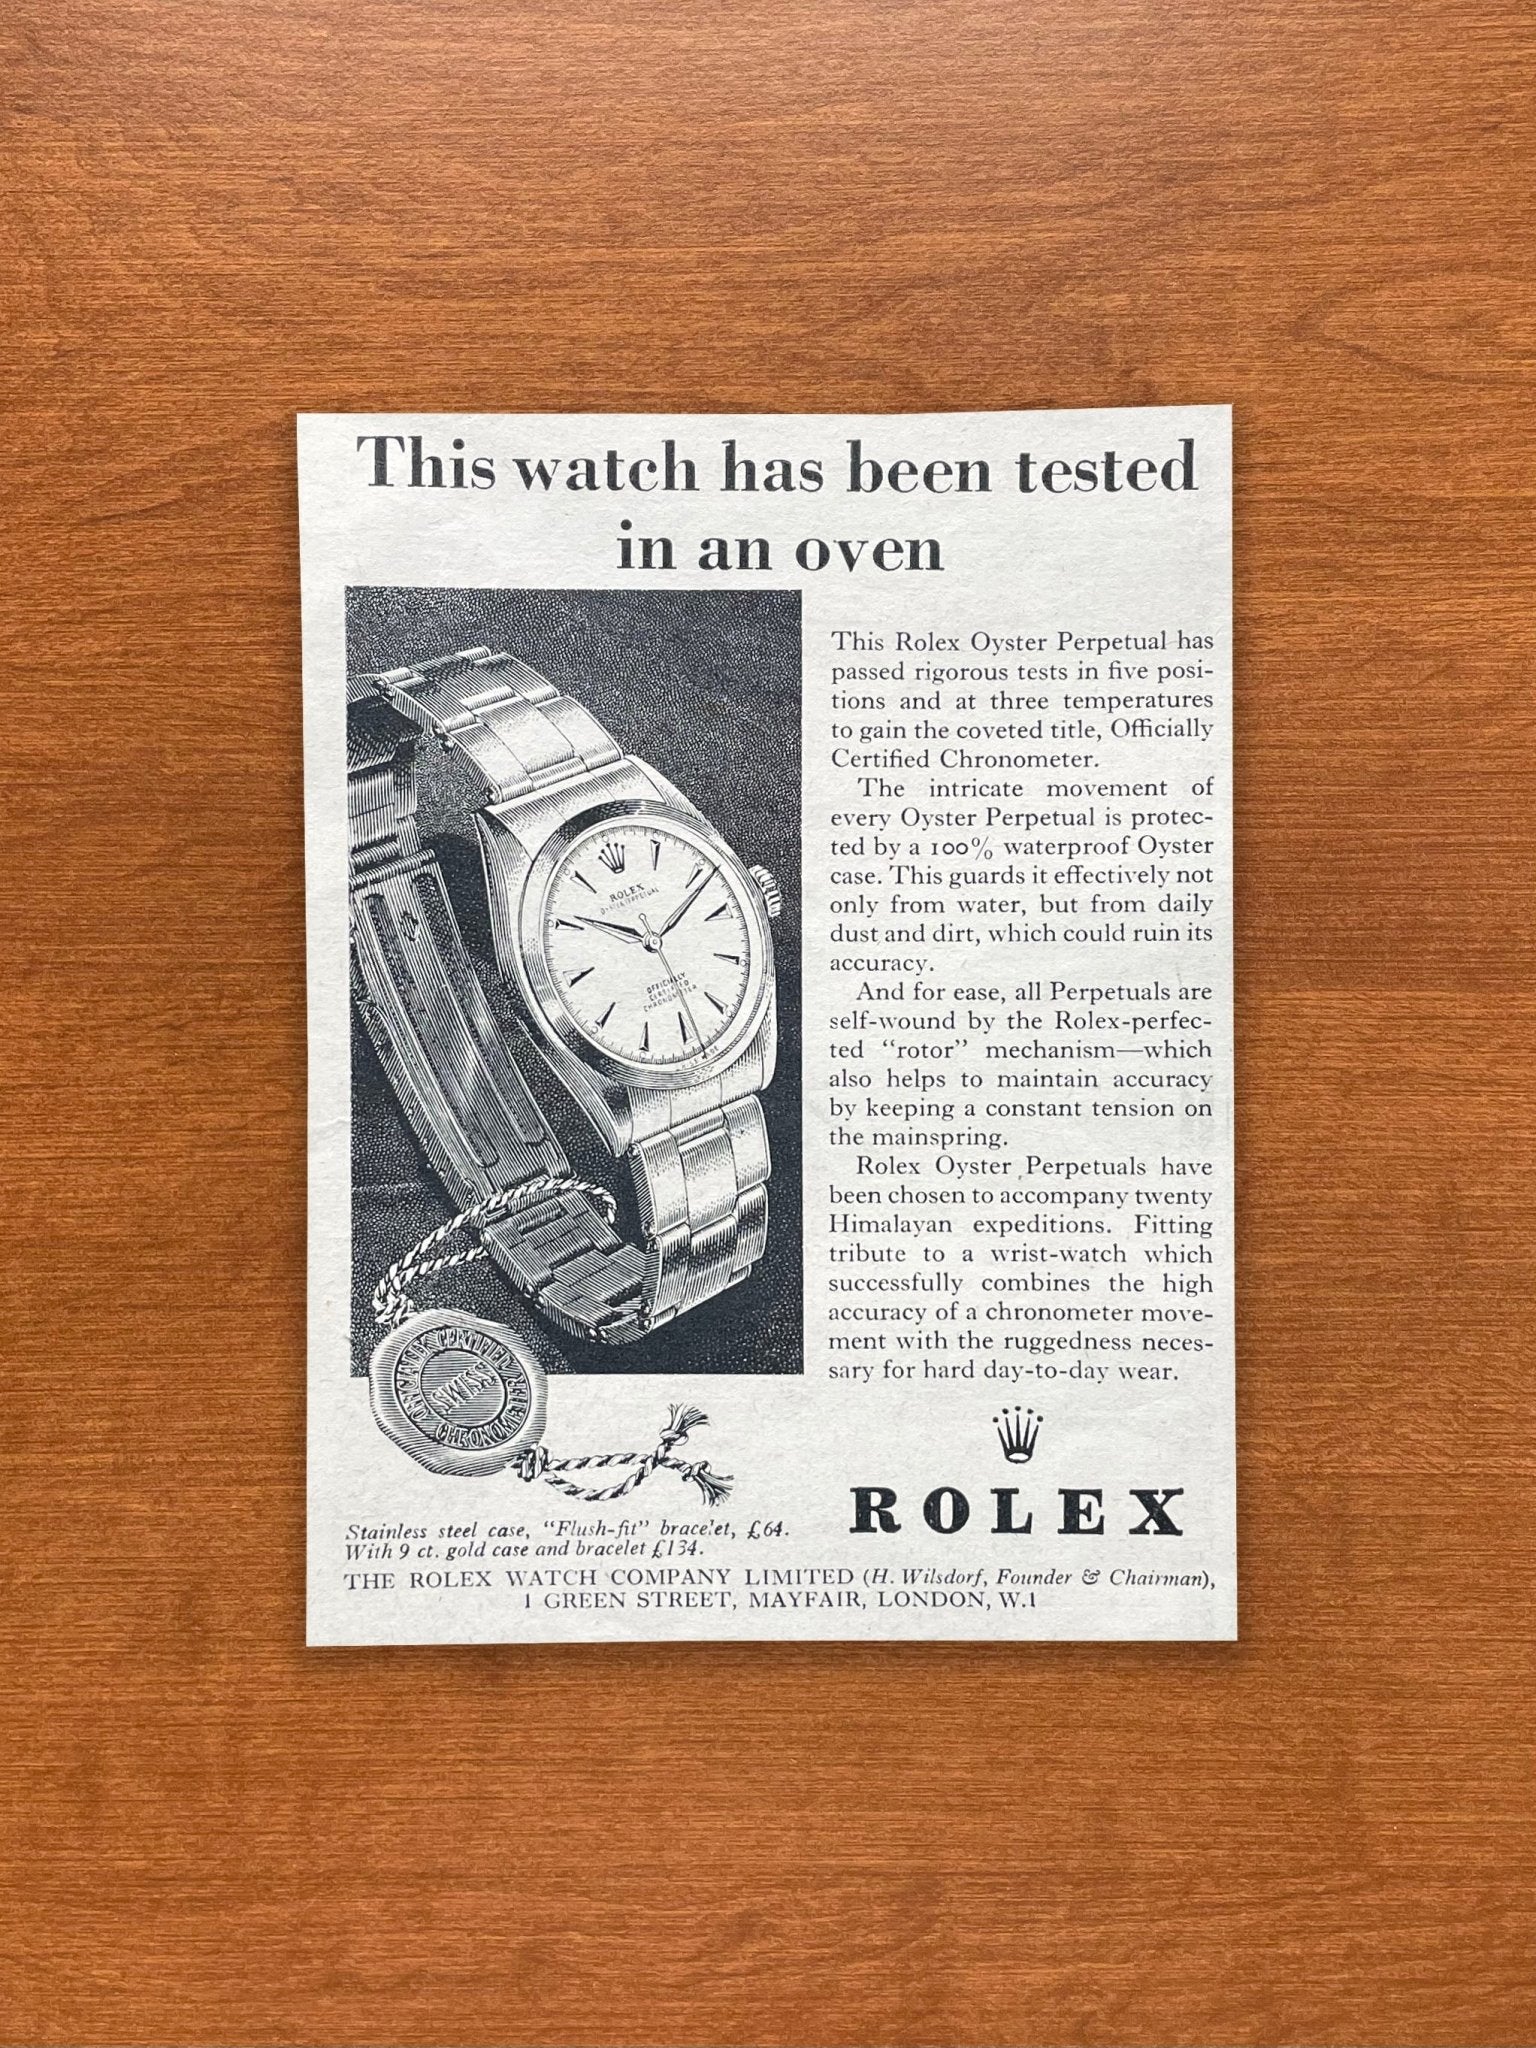 1960 Rolex Oyster Perpetual "been tested in an oven" Advertisement